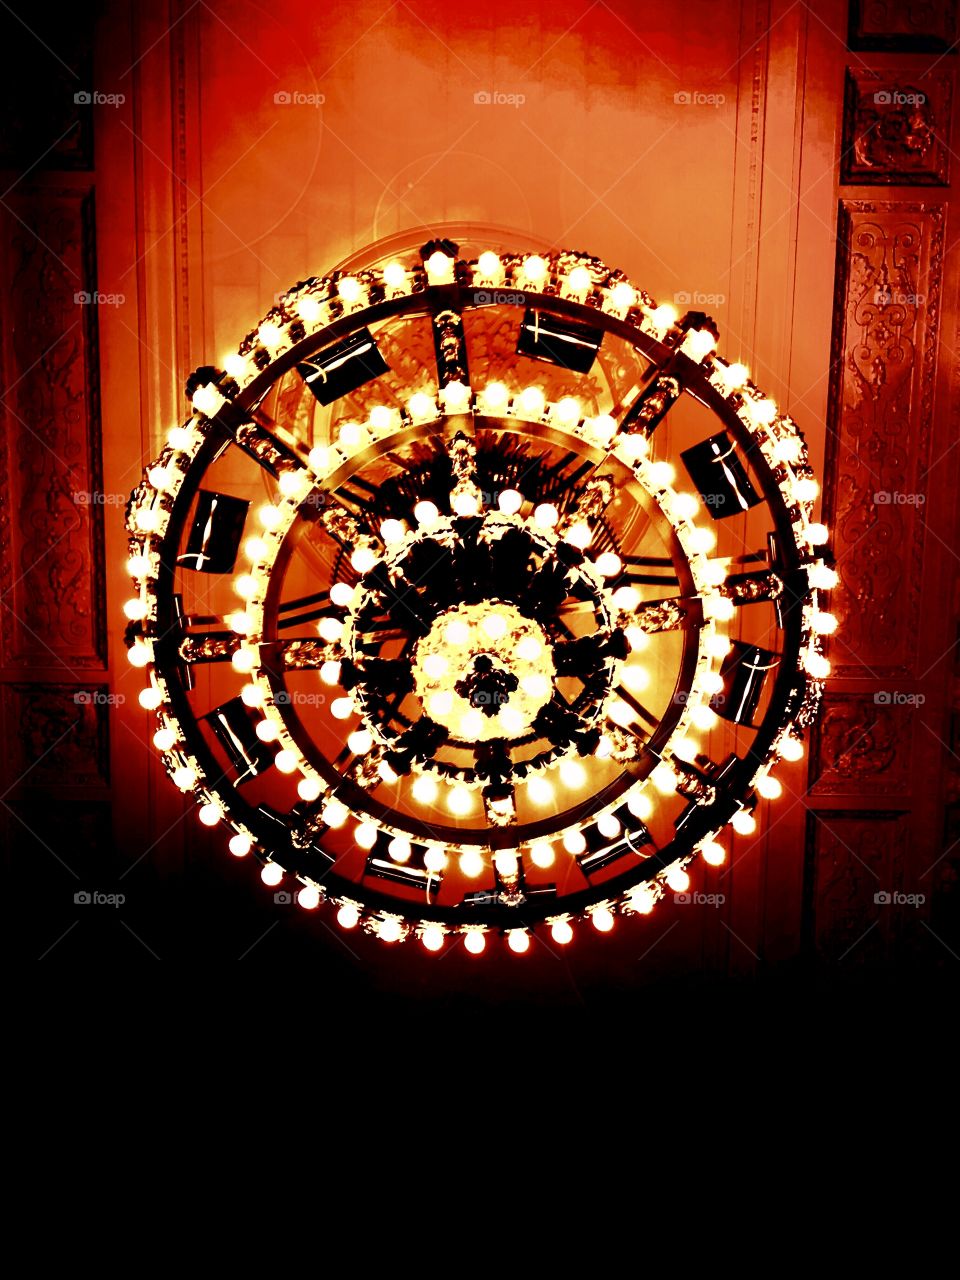 Chandelier in Grand Central Terminal in New York City 